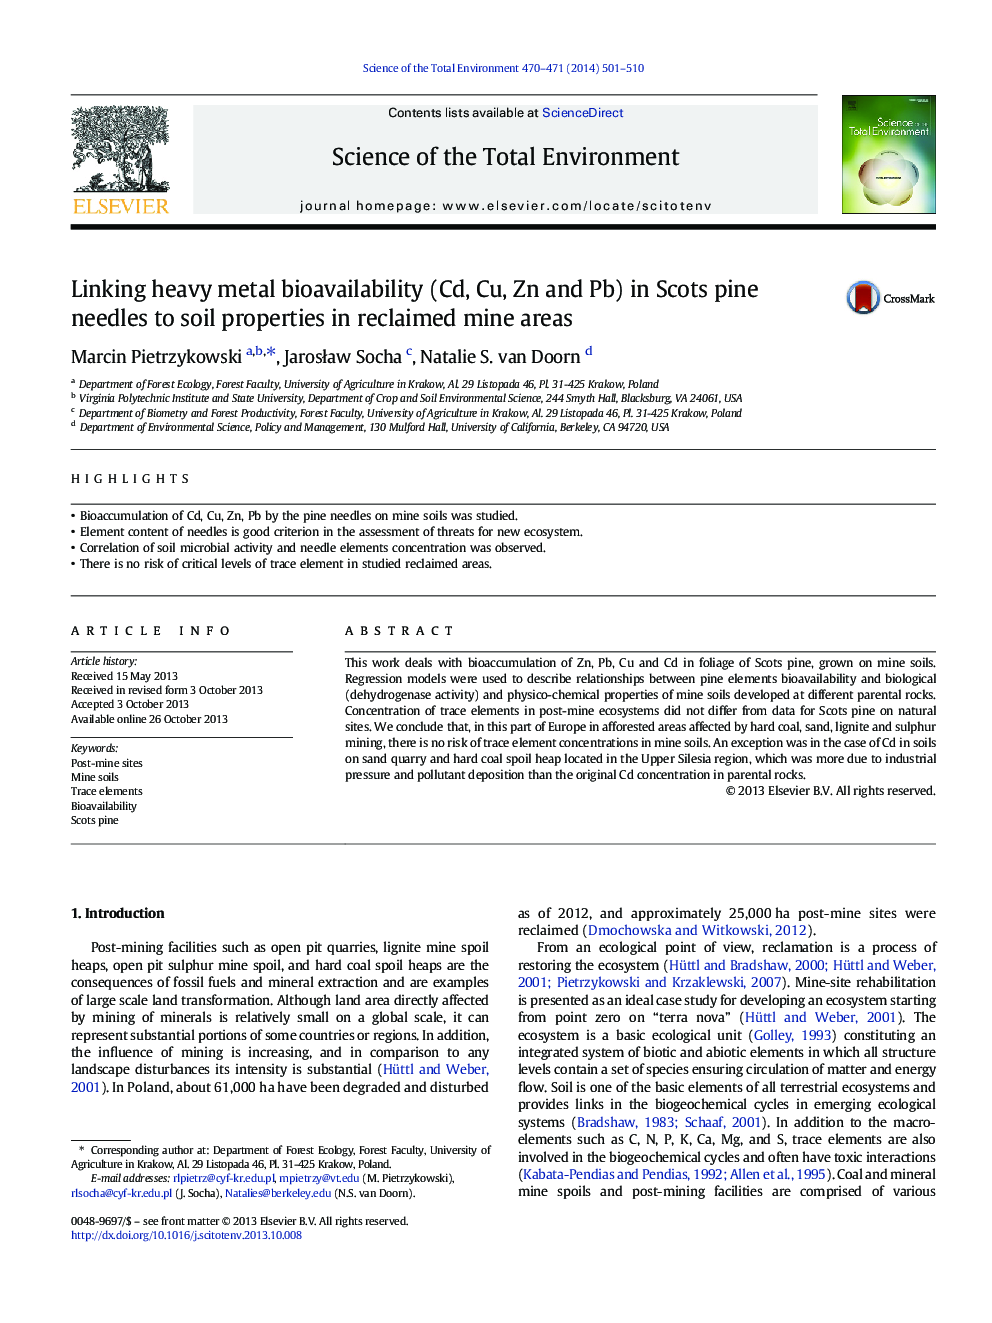 Linking heavy metal bioavailability (Cd, Cu, Zn and Pb) in Scots pine needles to soil properties in reclaimed mine areas